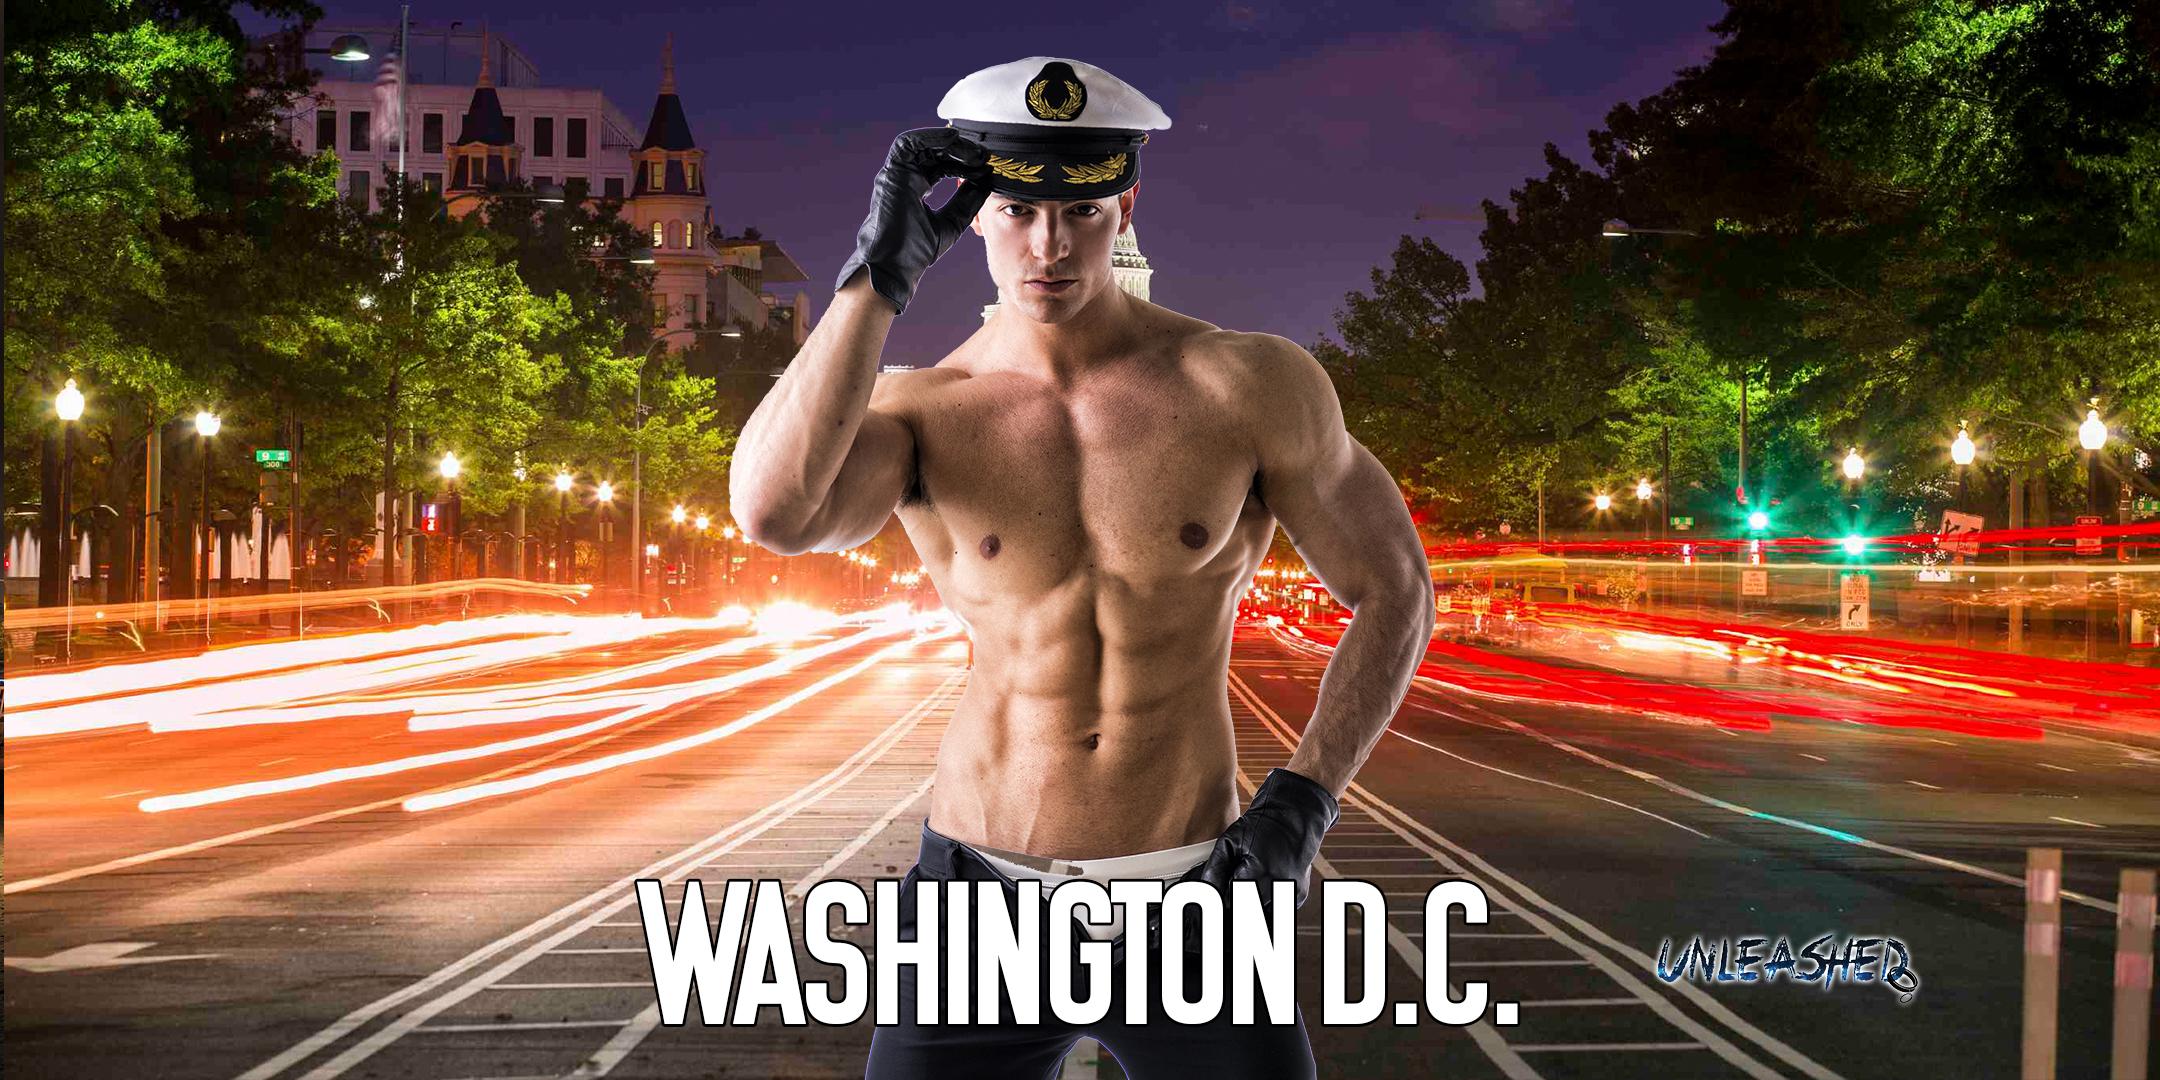 Male Strippers UNLEASHED Male Revue Washington DC 8-10 PM